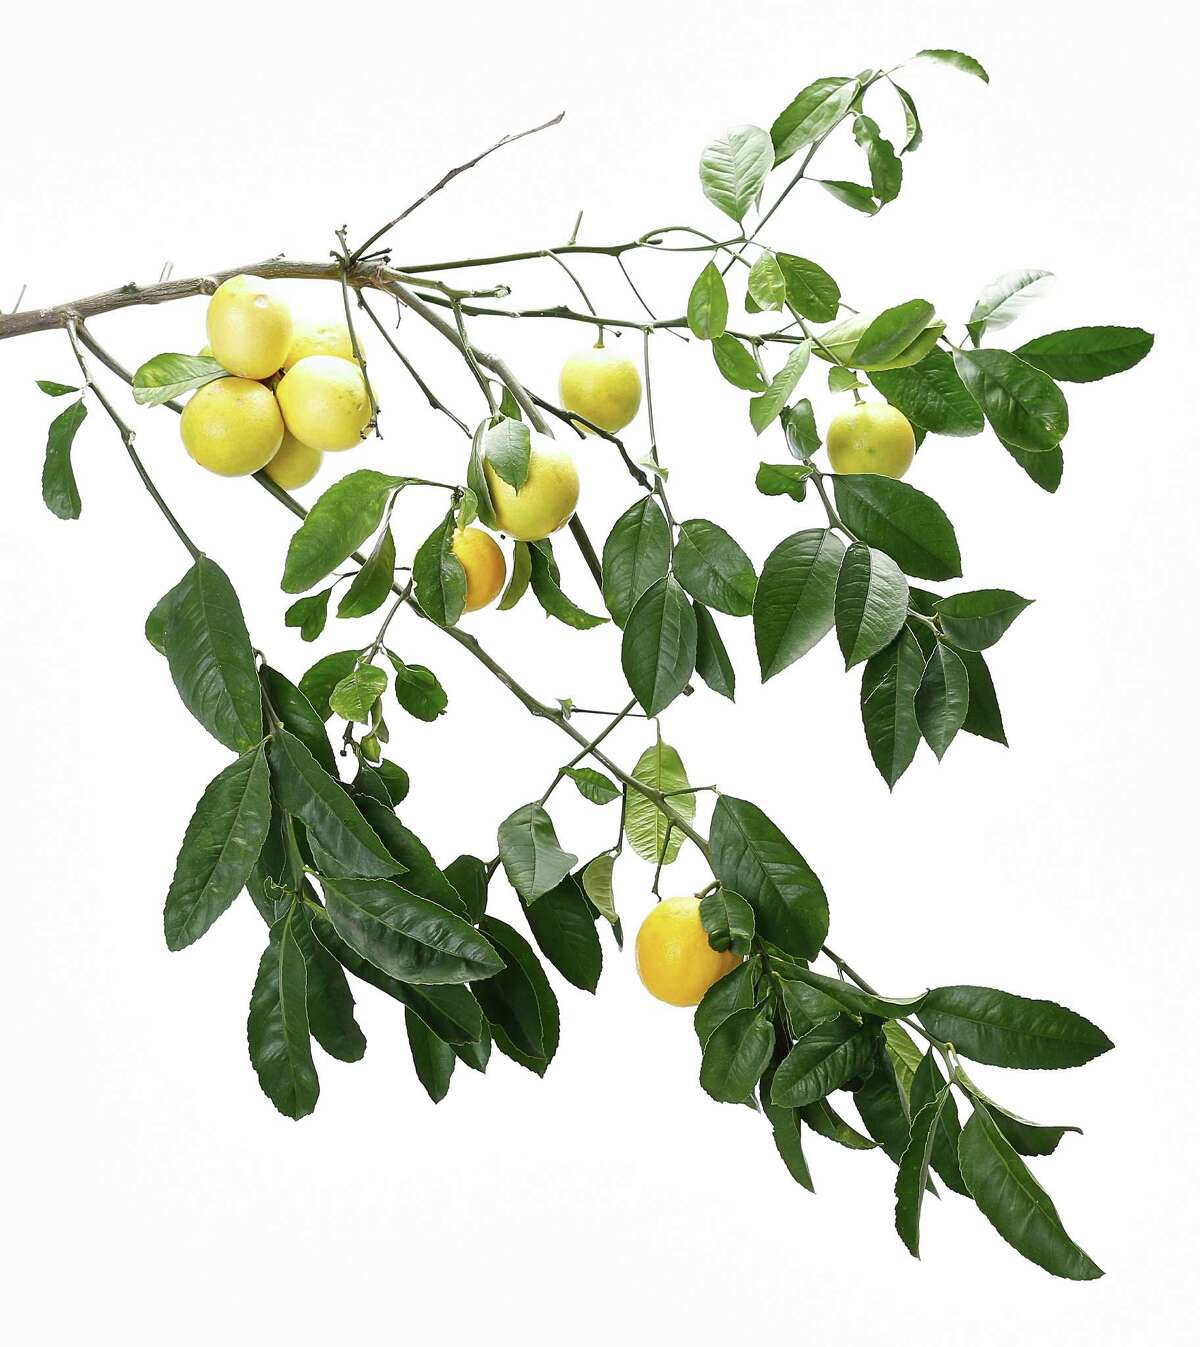 Meyer lemons are easy to grow in containers or small plots.